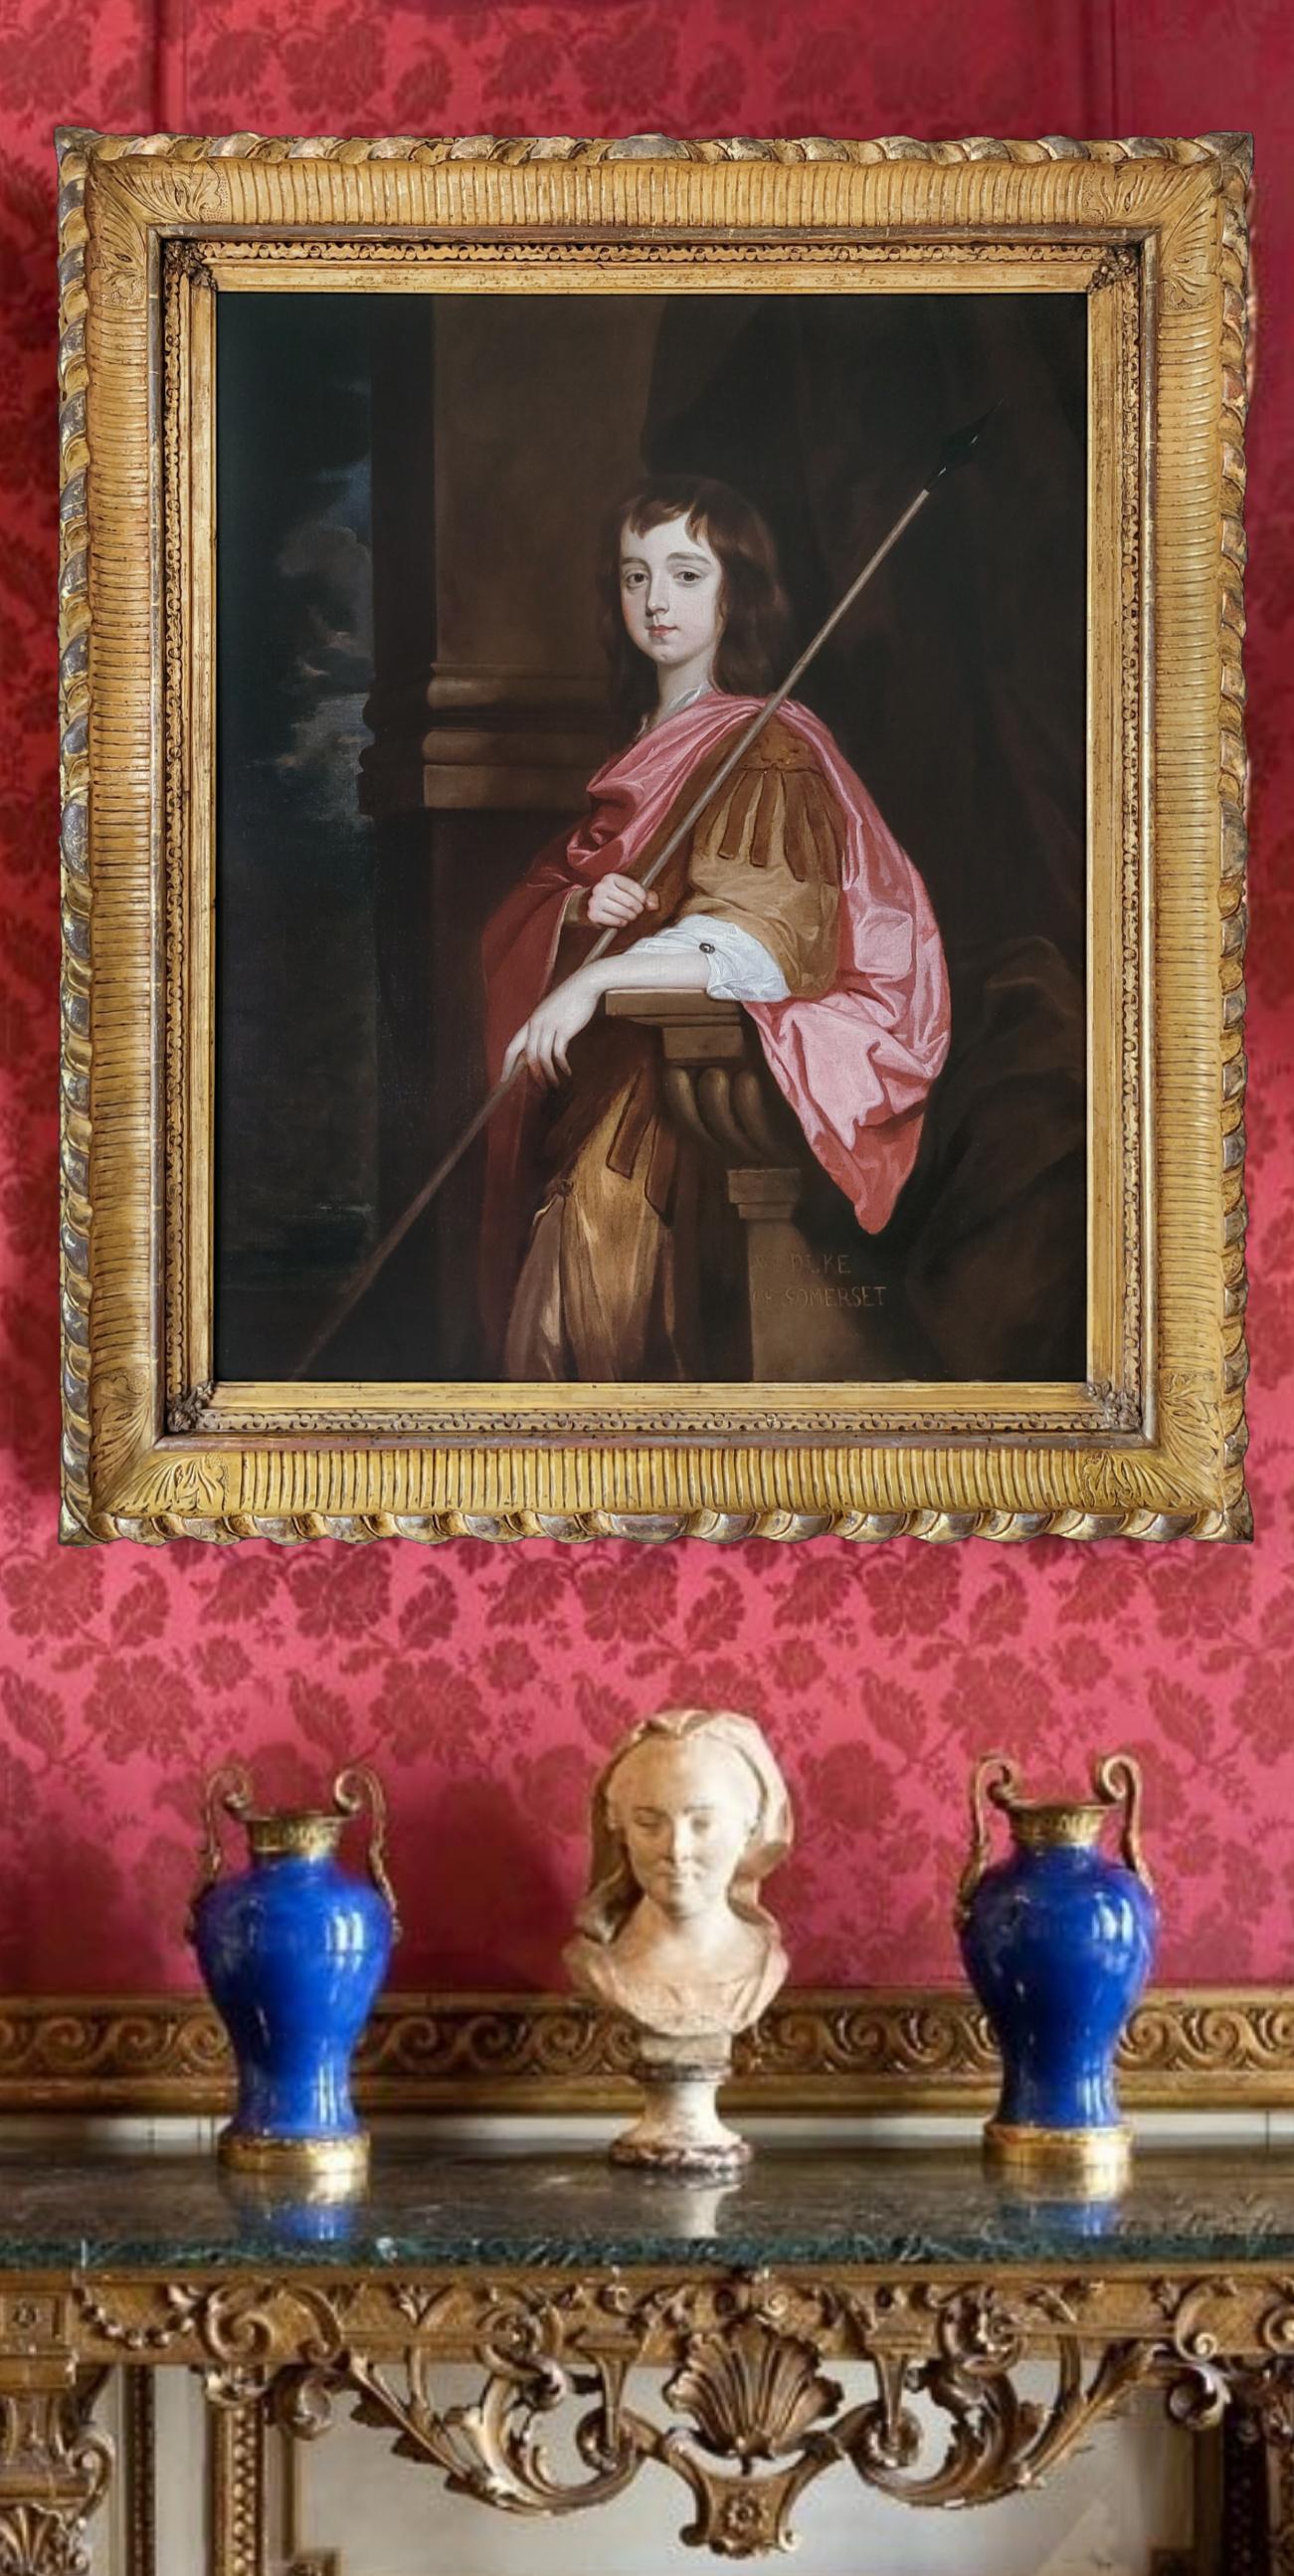 This exquisite portrait, presented by Titan Fine Art, of William Seymour is a product of the studio of the court painter, Sir Peter Lely. The sitter was Duke of Somerset, Marquis of Hertford, Viscount Beauchamp, and Baron Seymour, and he was the son